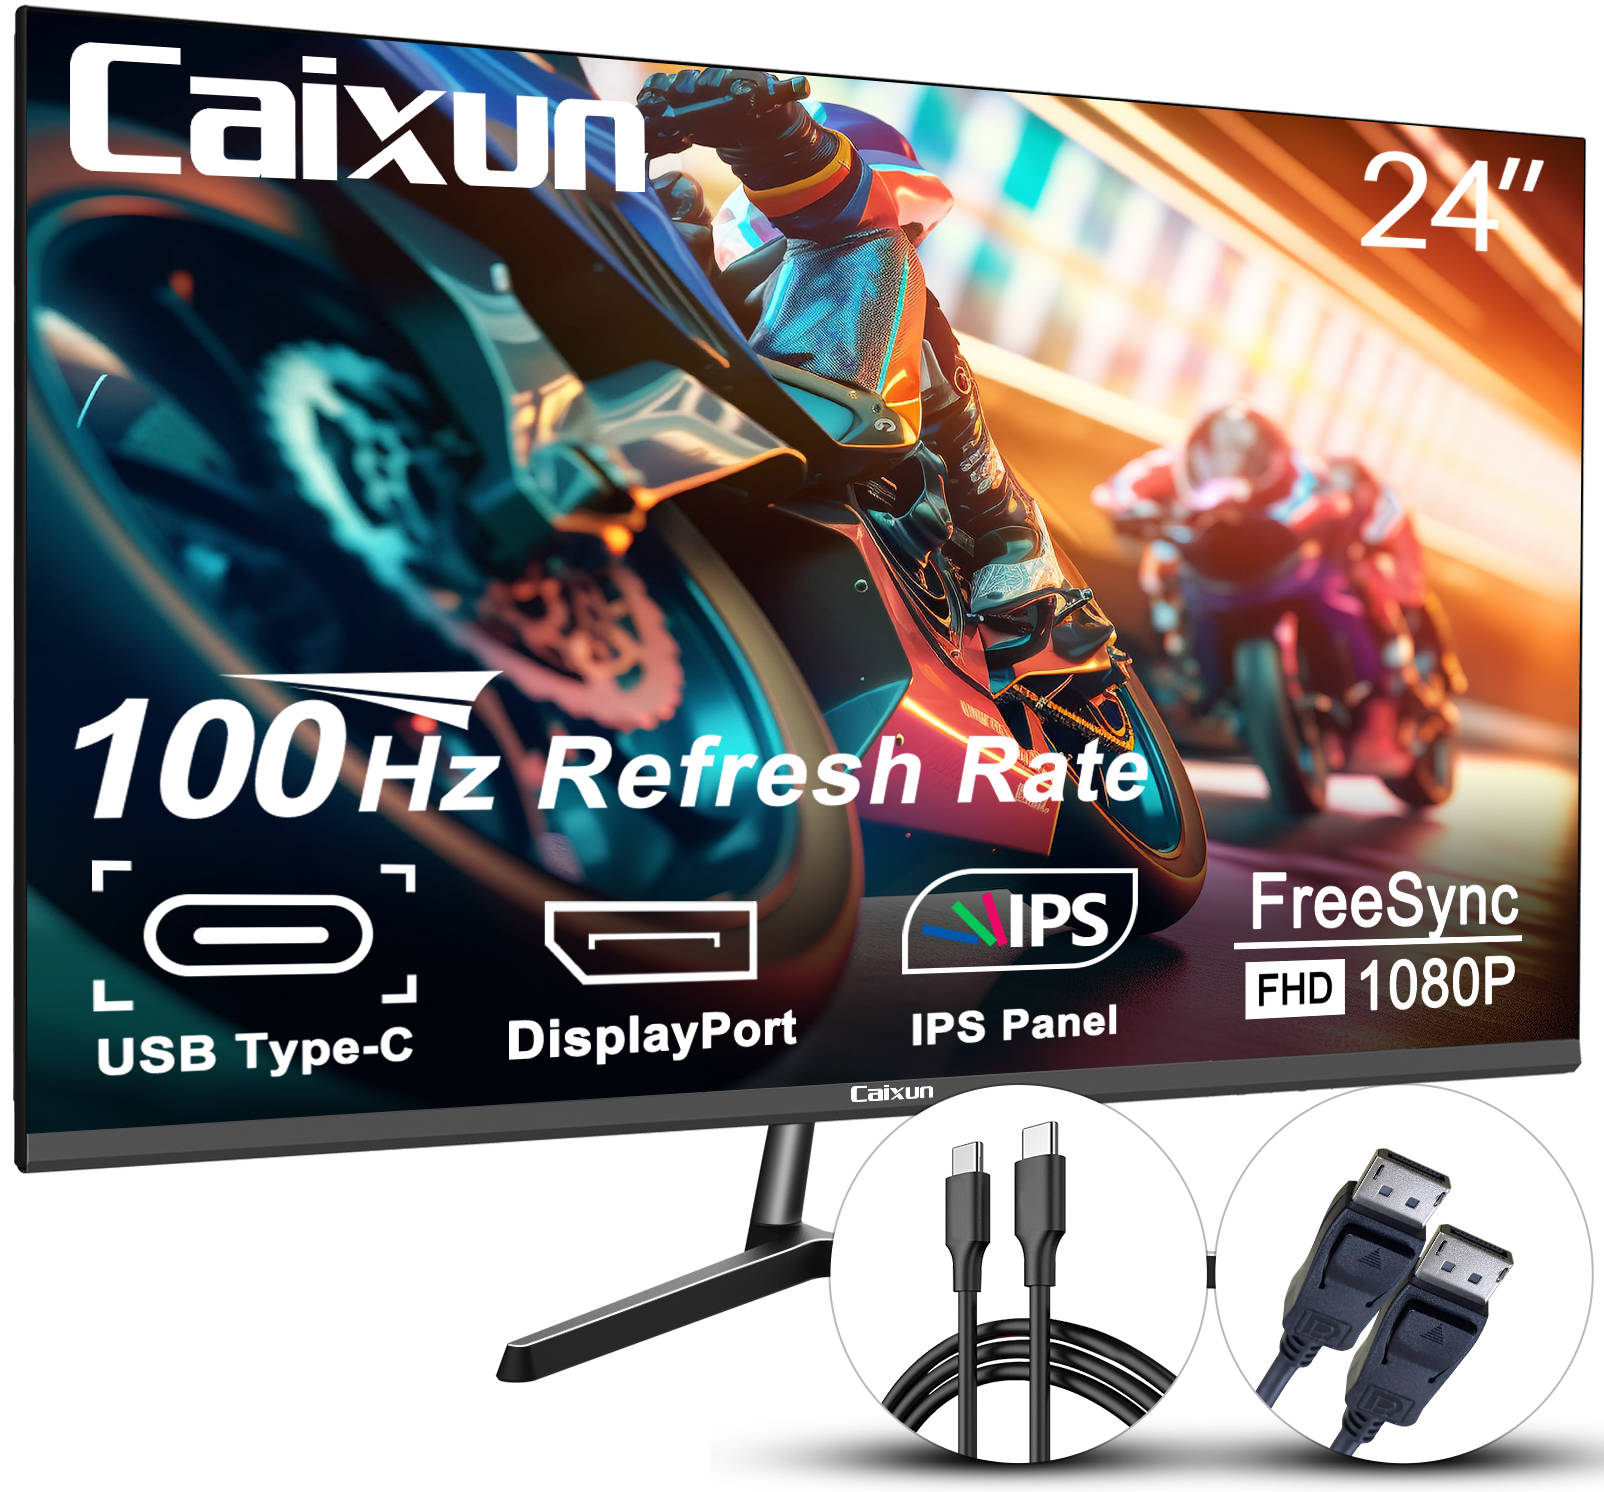 Caixun 4K Android TV 75-inch Review: Budget-Friendly Performance